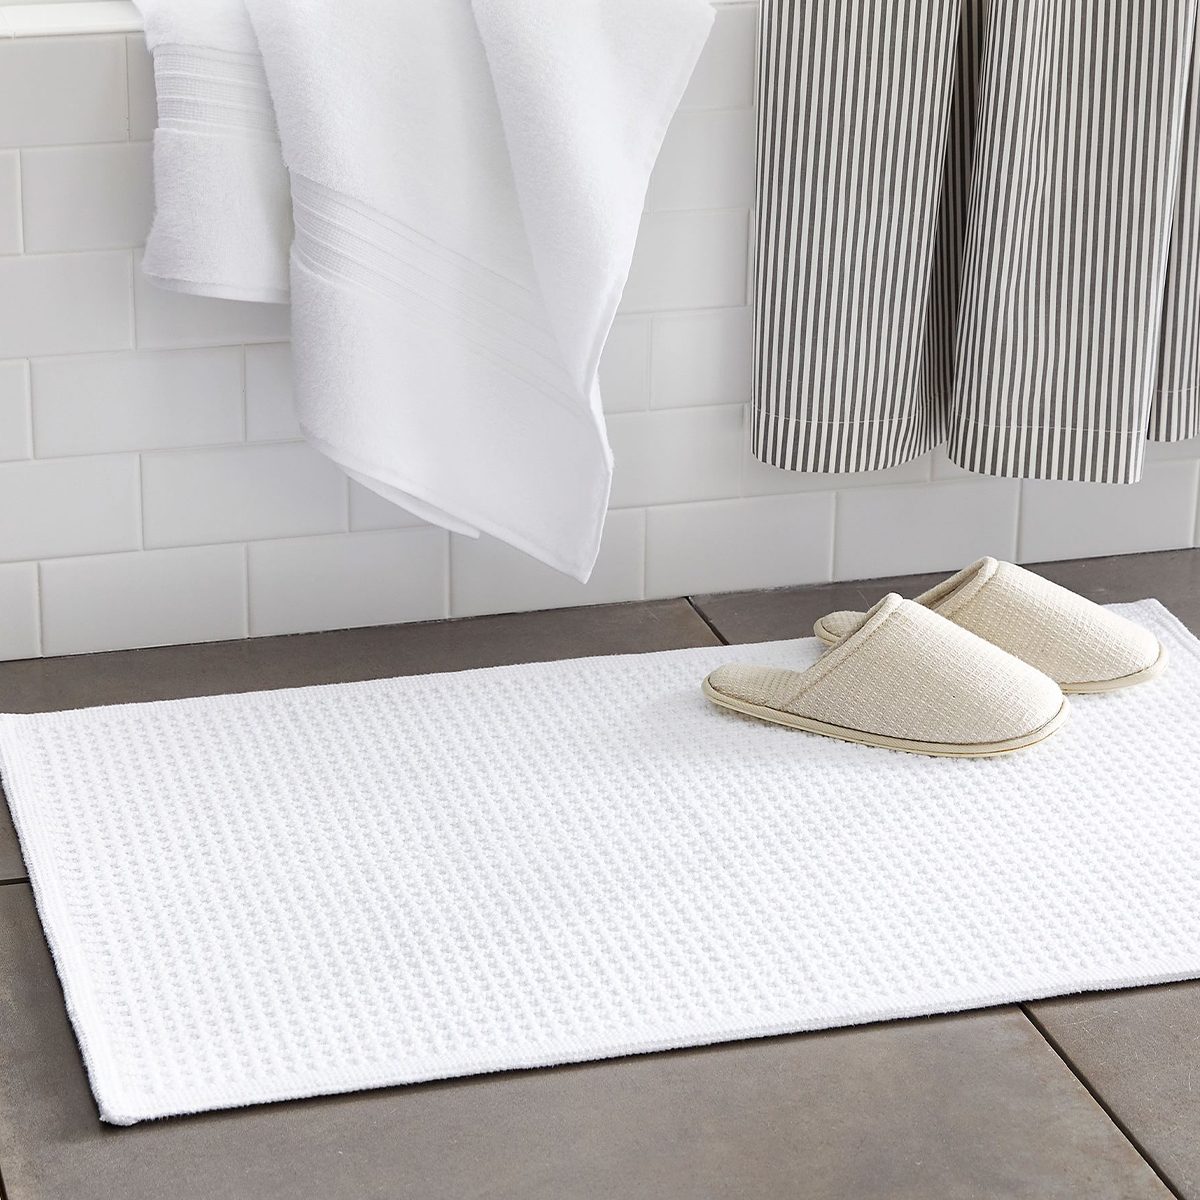 6 Best Antimicrobial Bath Mats in 2022